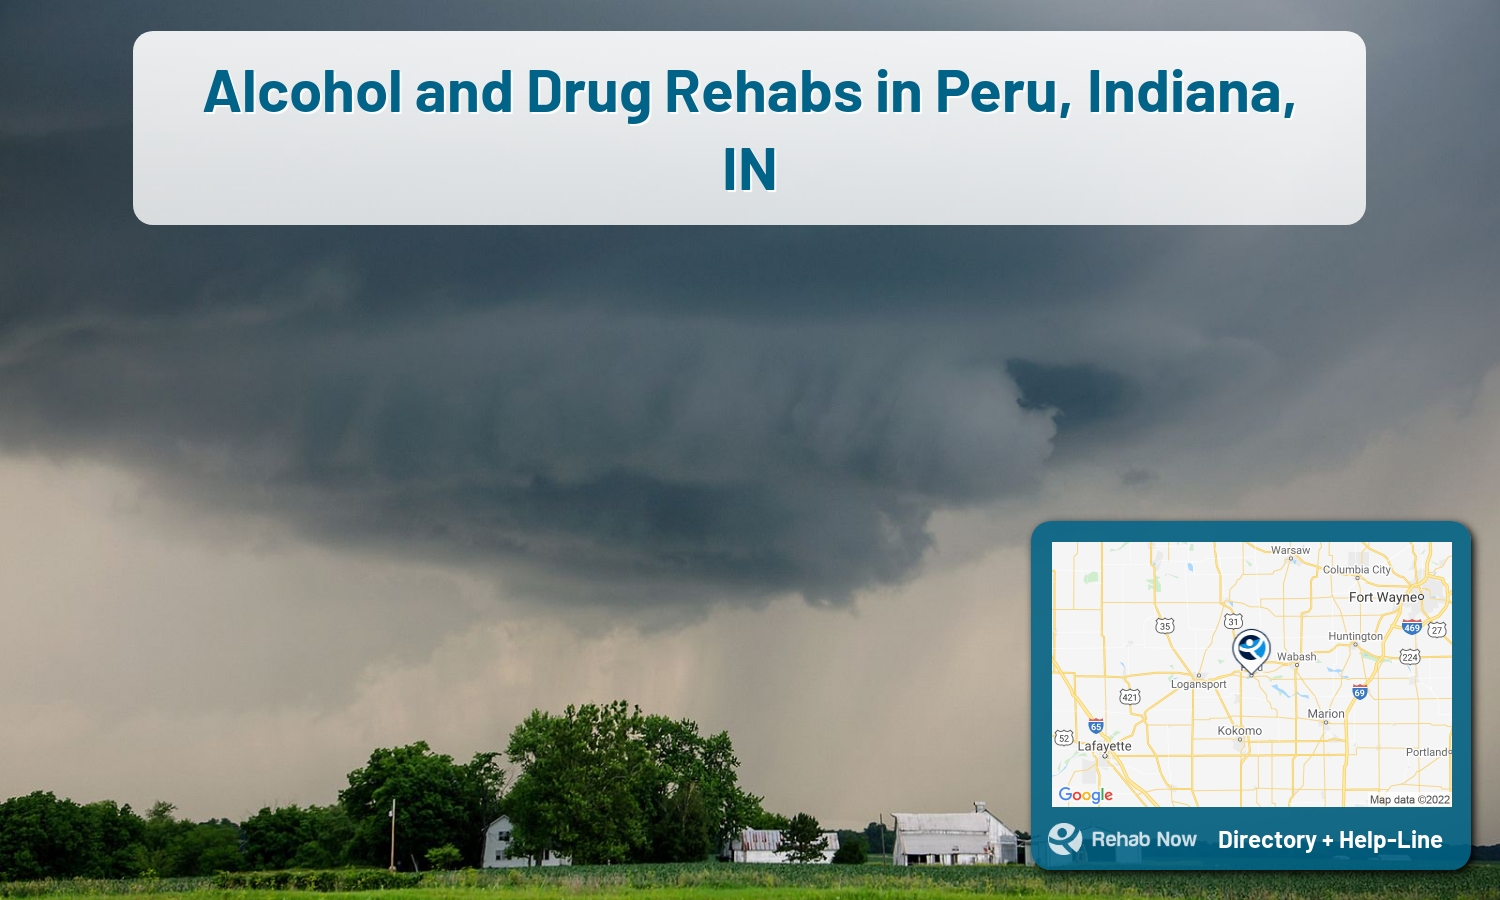 Drug rehab and alcohol treatment services nearby Peru, IN. Need help choosing a treatment program? Call our free hotline!